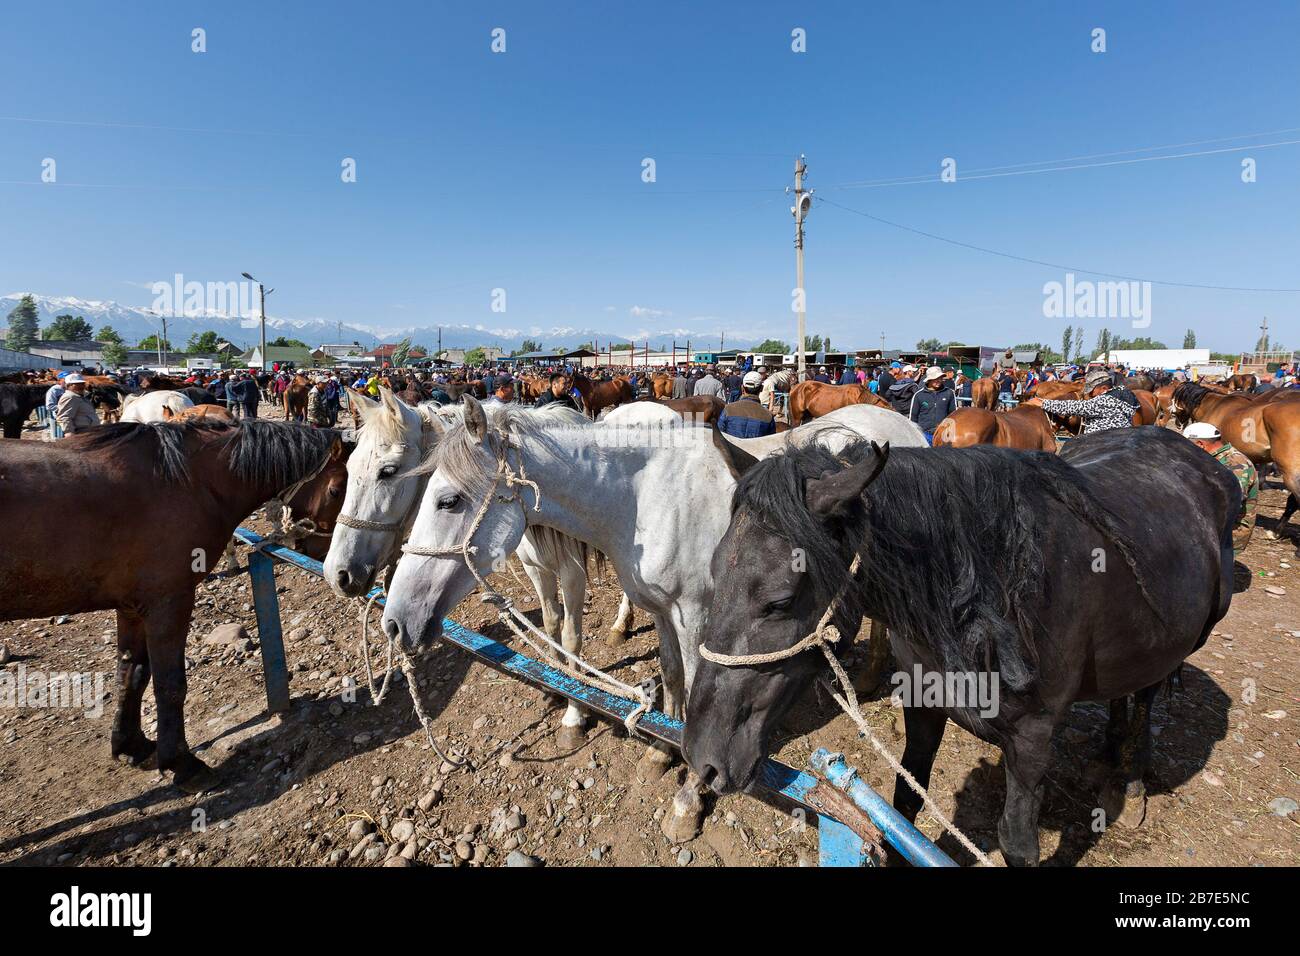 Horses for sale in the live stock market, in Tokmok, Kyrgyzstan Stock Photo